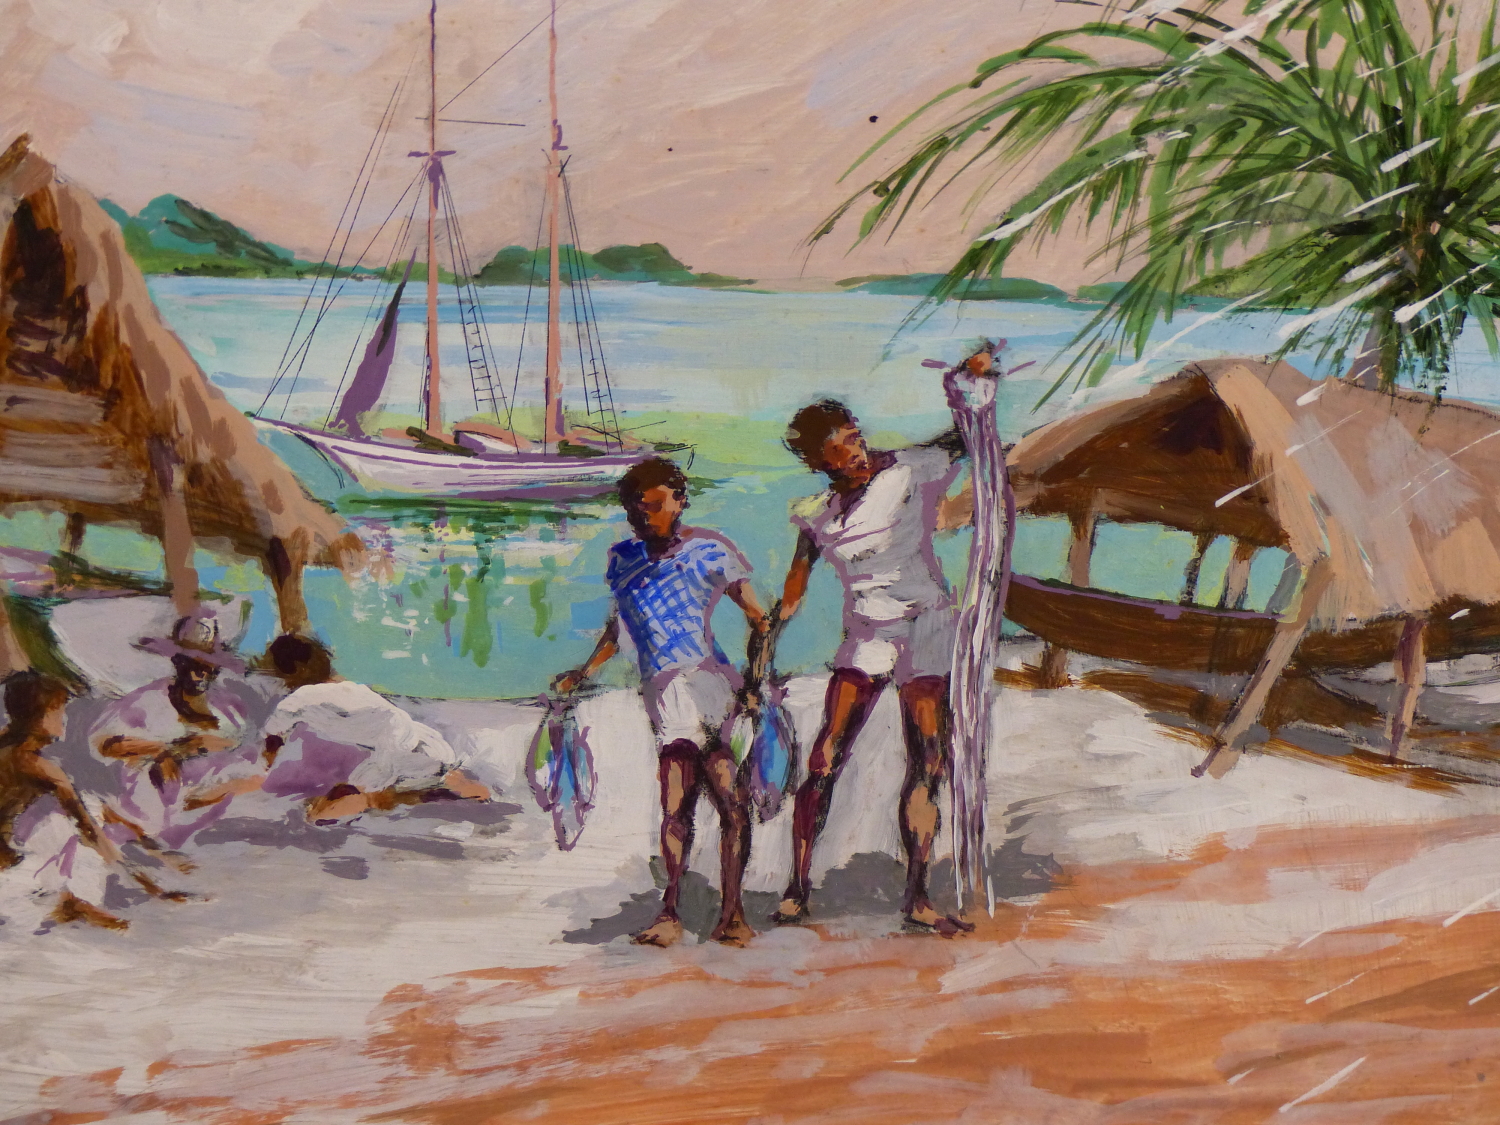 IVY T. ATTWELL (1895-1985) ARR. STUDY OF BOYS ON A BEACH WITH GRASS ROOF HUTS,SIGNED LOWER RIGHT, OI - Image 5 of 6